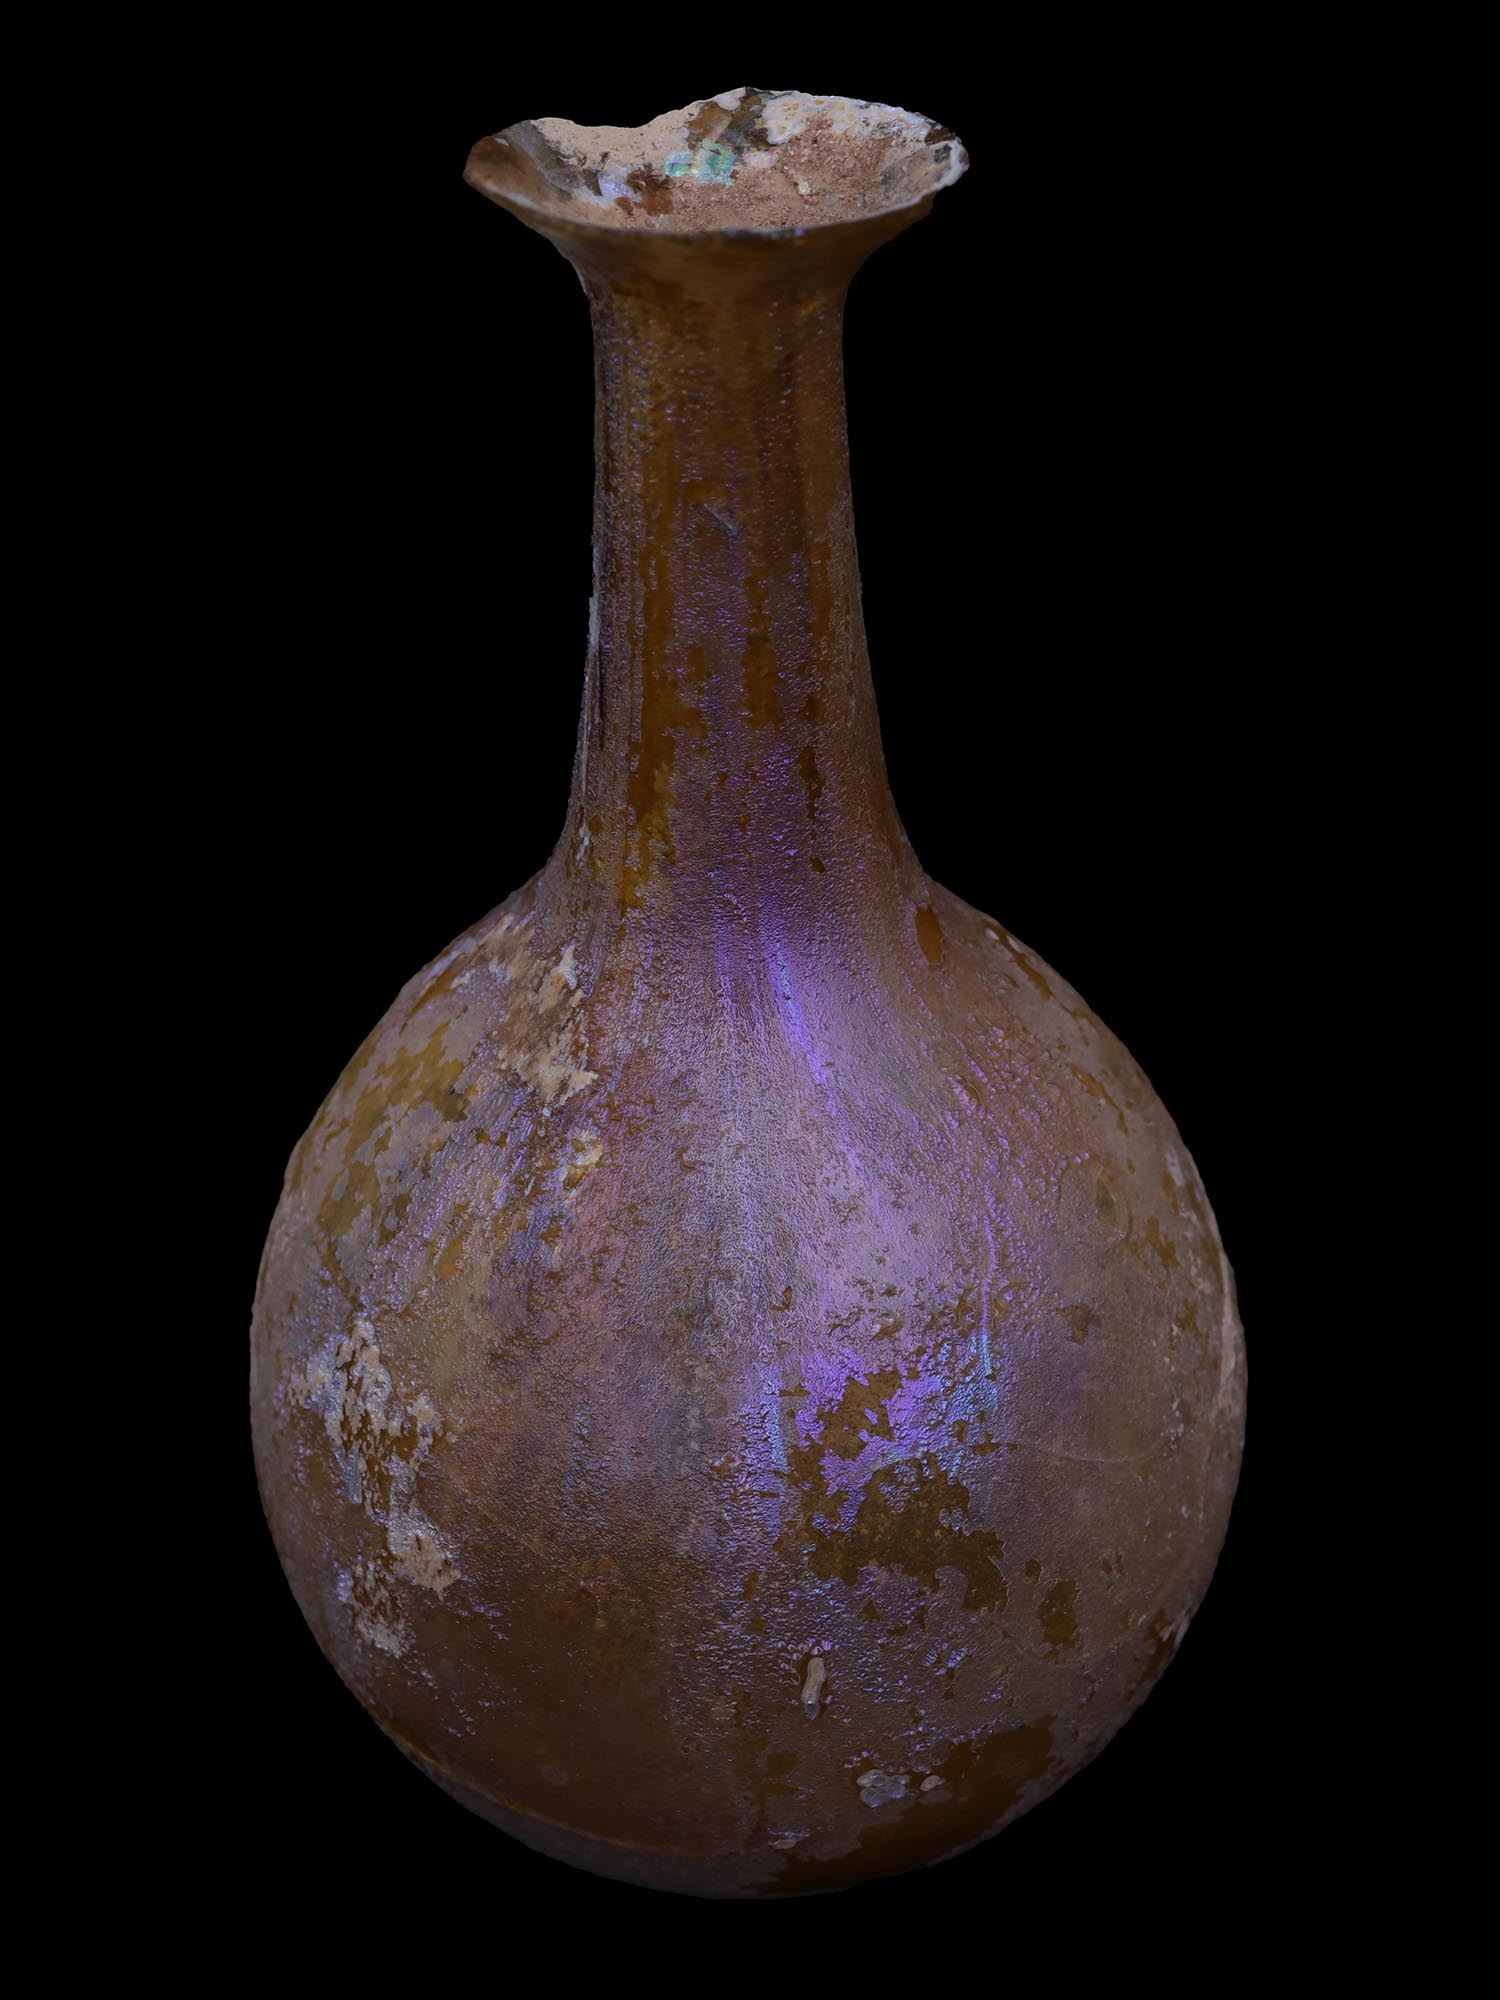 SMALL ARCHAEOLOGICAL ROMAN GLASS PERFUME BOTTLE PIC-2